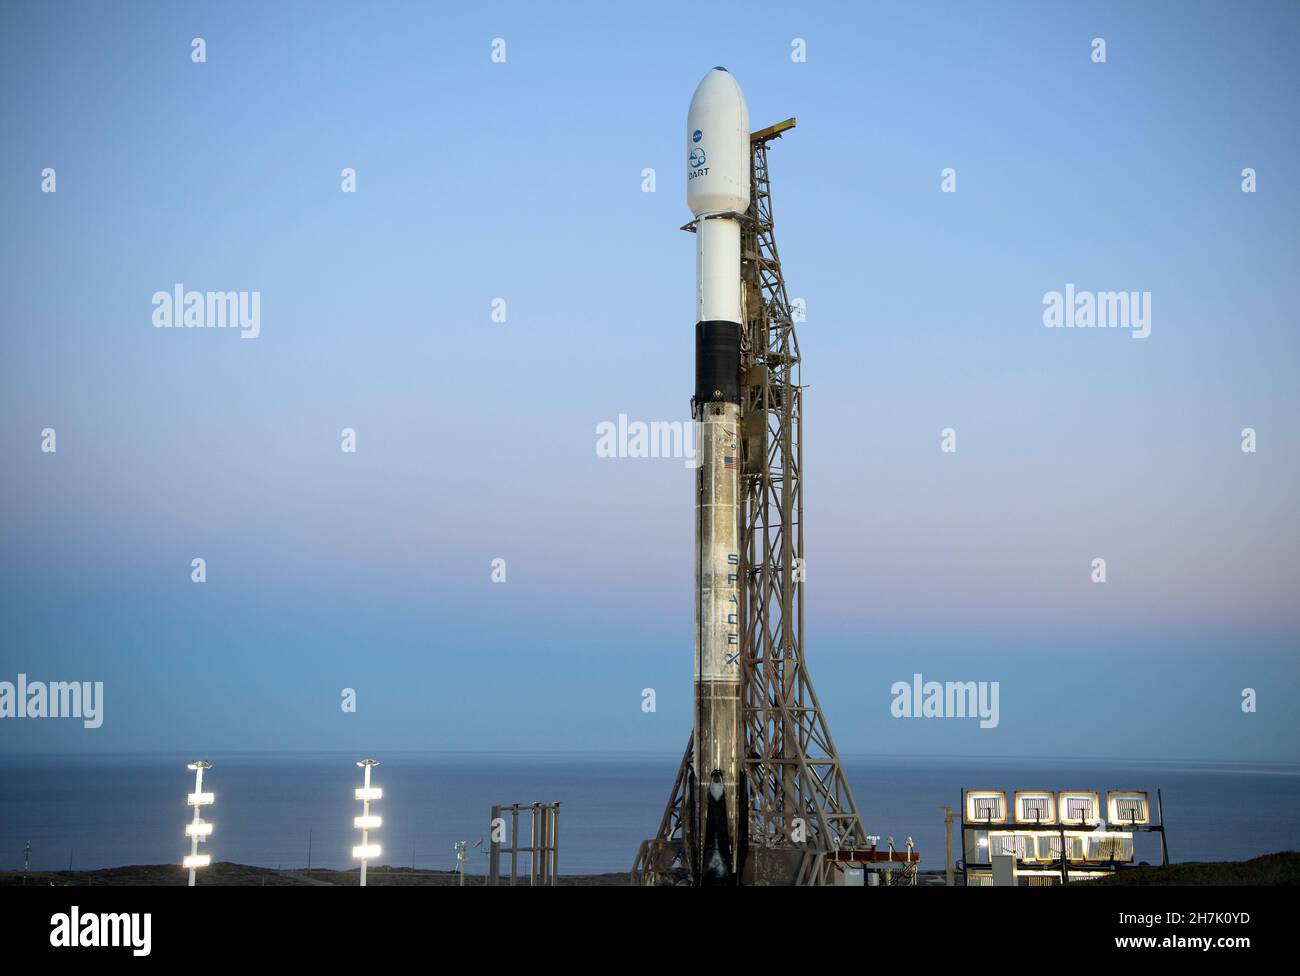 The SpaceX Falcon 9 rocket with the Double Asteroid Redirection Test, or DART, spacecraft onboard, is seen during sunrise, Tuesday, Nov. 23, 2021, at Space Launch Complex 4E, Vandenberg Space Force Base in California. DART is the world's first full-scale planetary defense test, demonstrating one method of asteroid deflection technology. The mission was built and is managed by the Johns Hopkins APL for NASA's Planetary Defense Coordination Office.Mandatory Credit: Bill Ingalls/NASA via CNP /MediaPunch Stock Photo